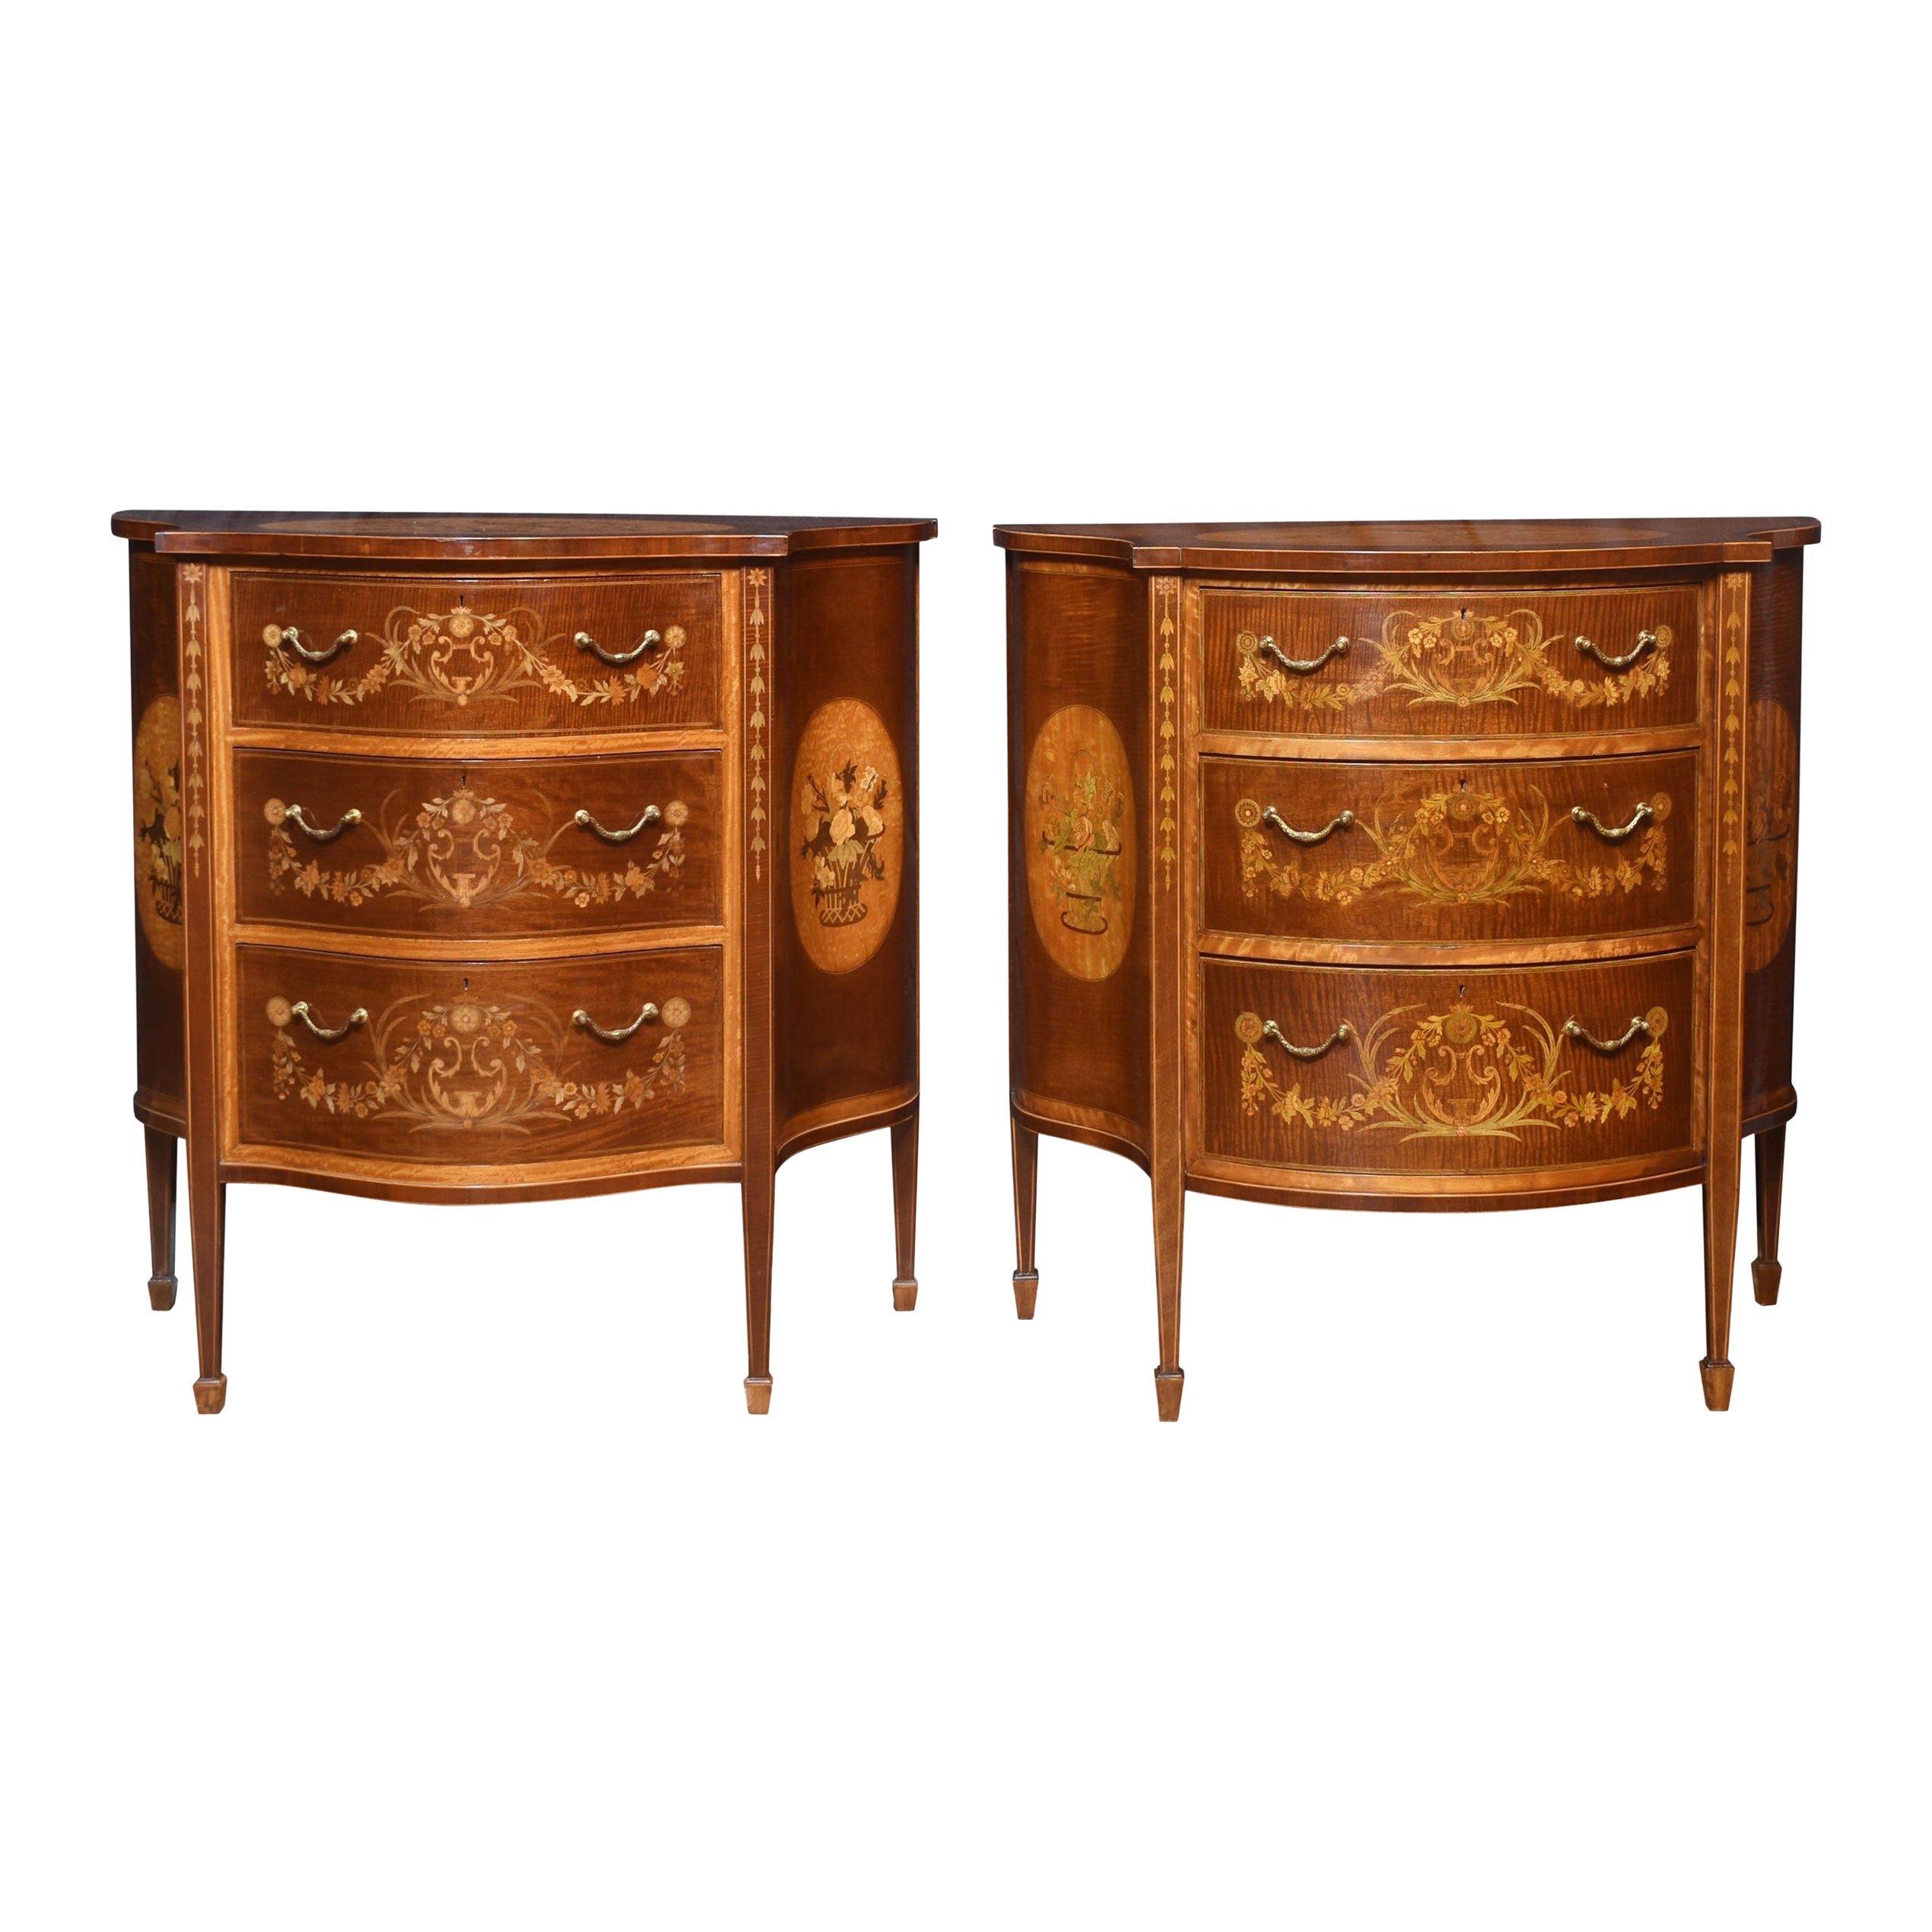 Near Pair of Edwards and Roberts Chest of Drawers